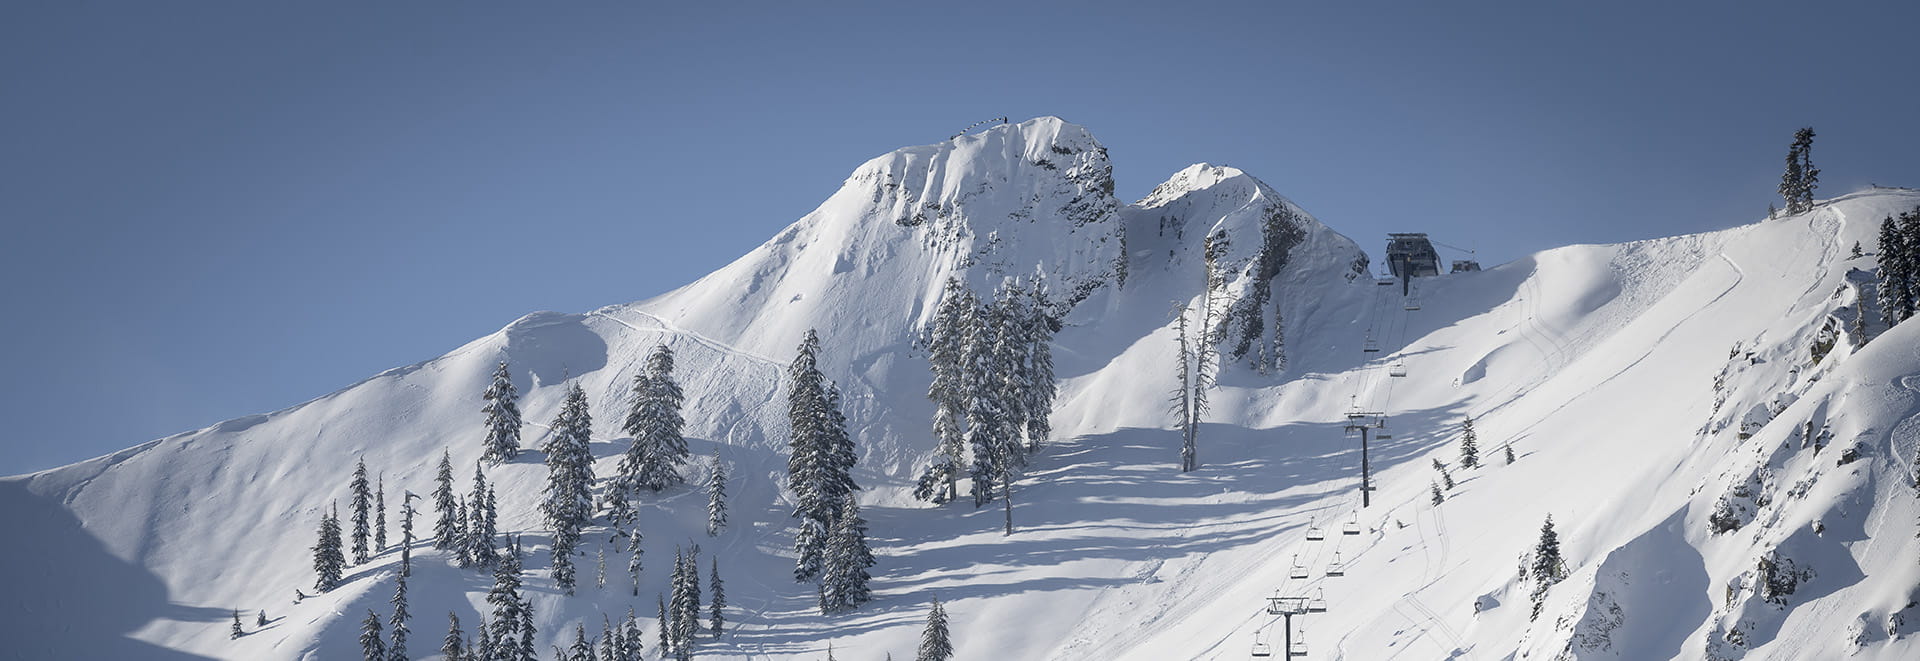 Check out our 11 legendary lifts at Palisades Tahoe